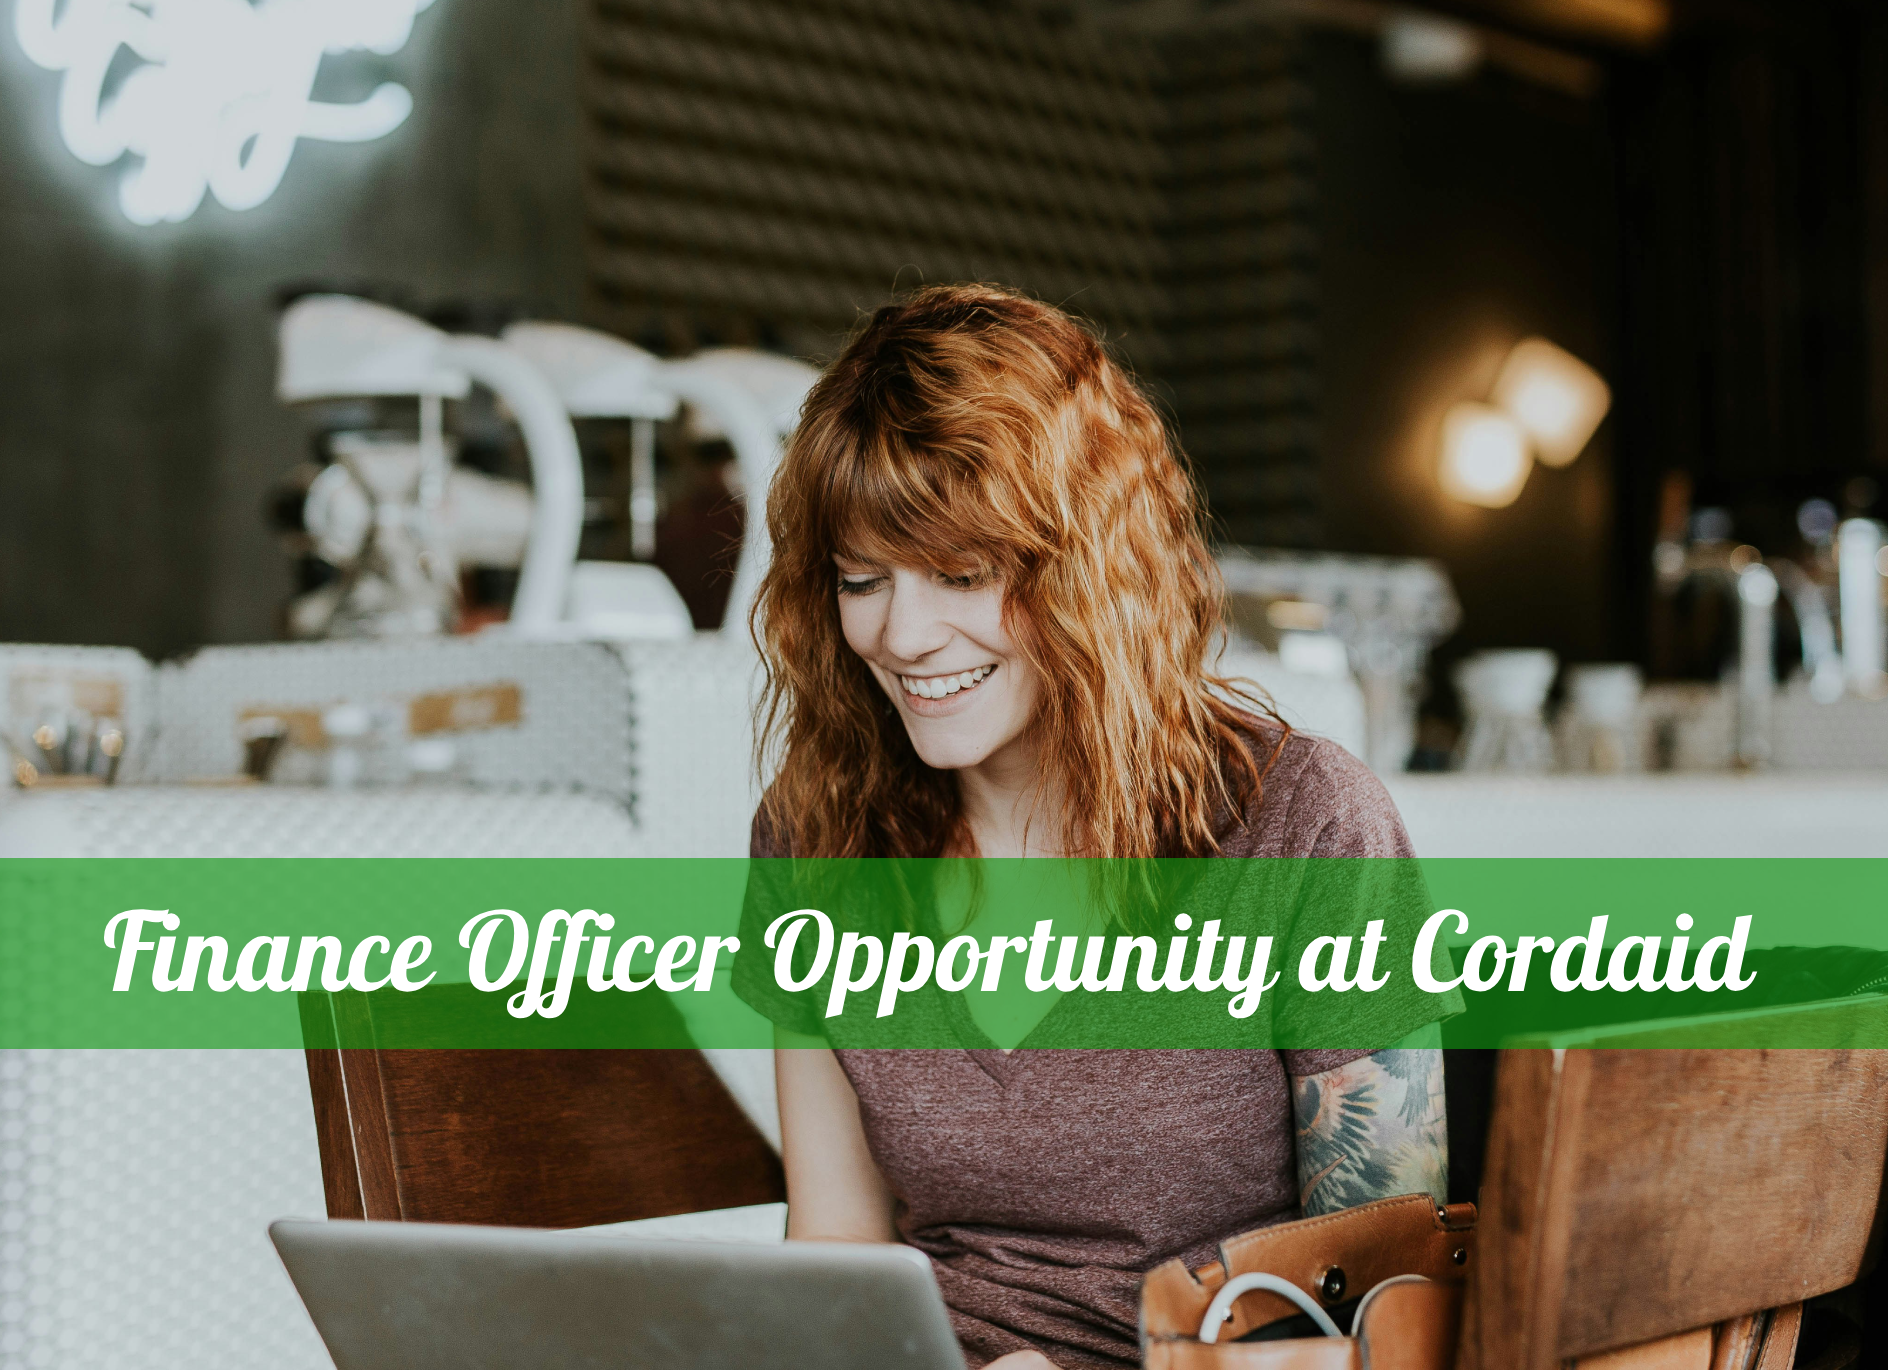 Finance Officer Opportunity at Cordaid